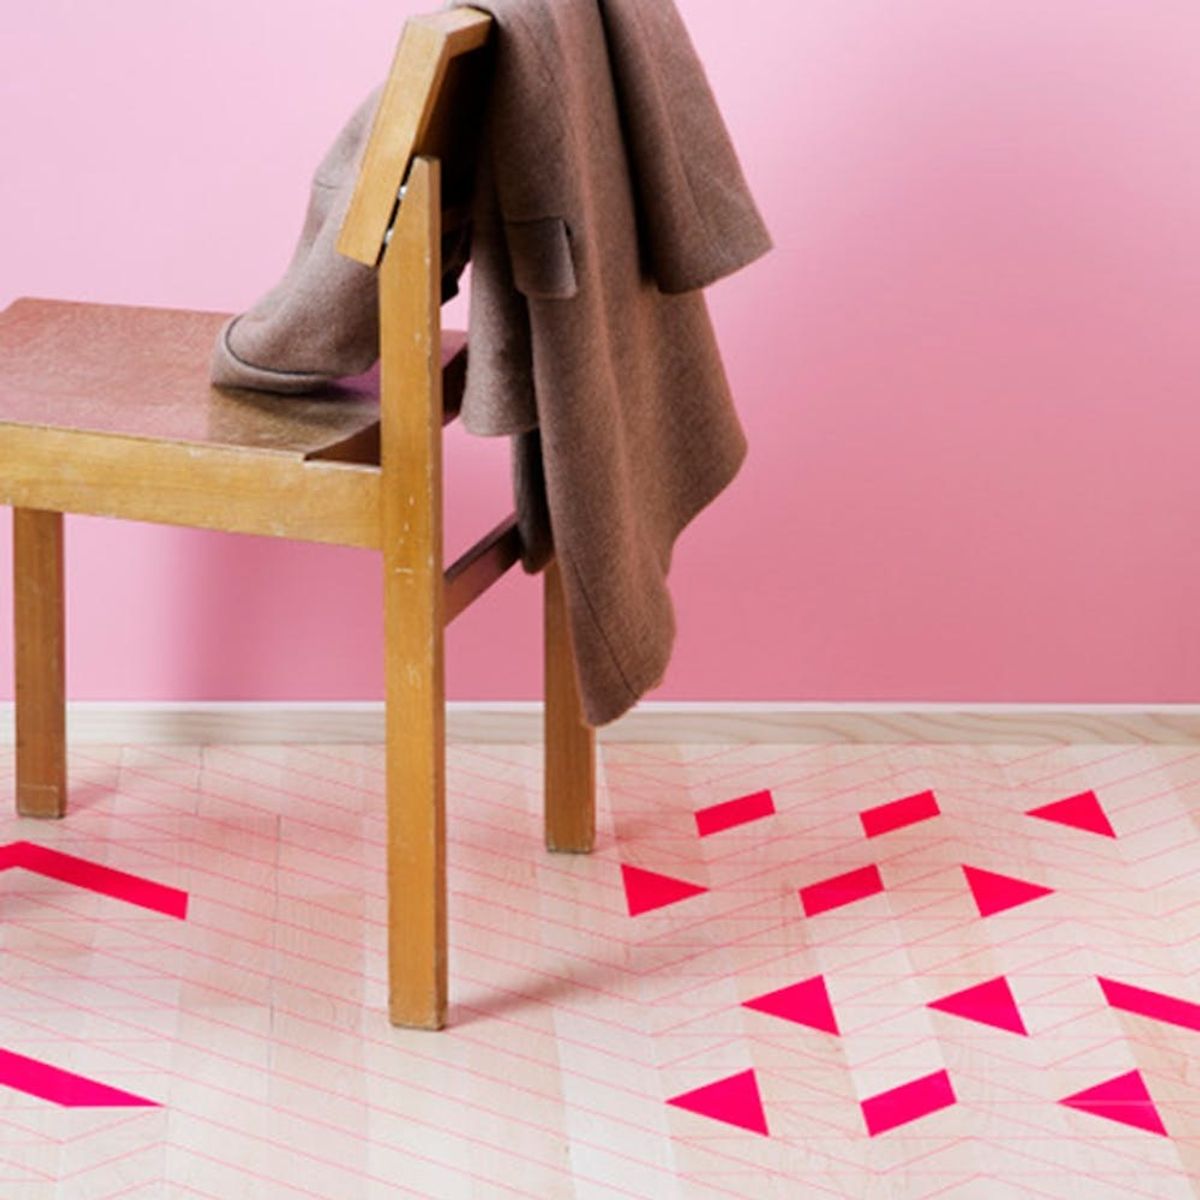 20 Creative Floors You Won’t Be Able to Stop Staring At